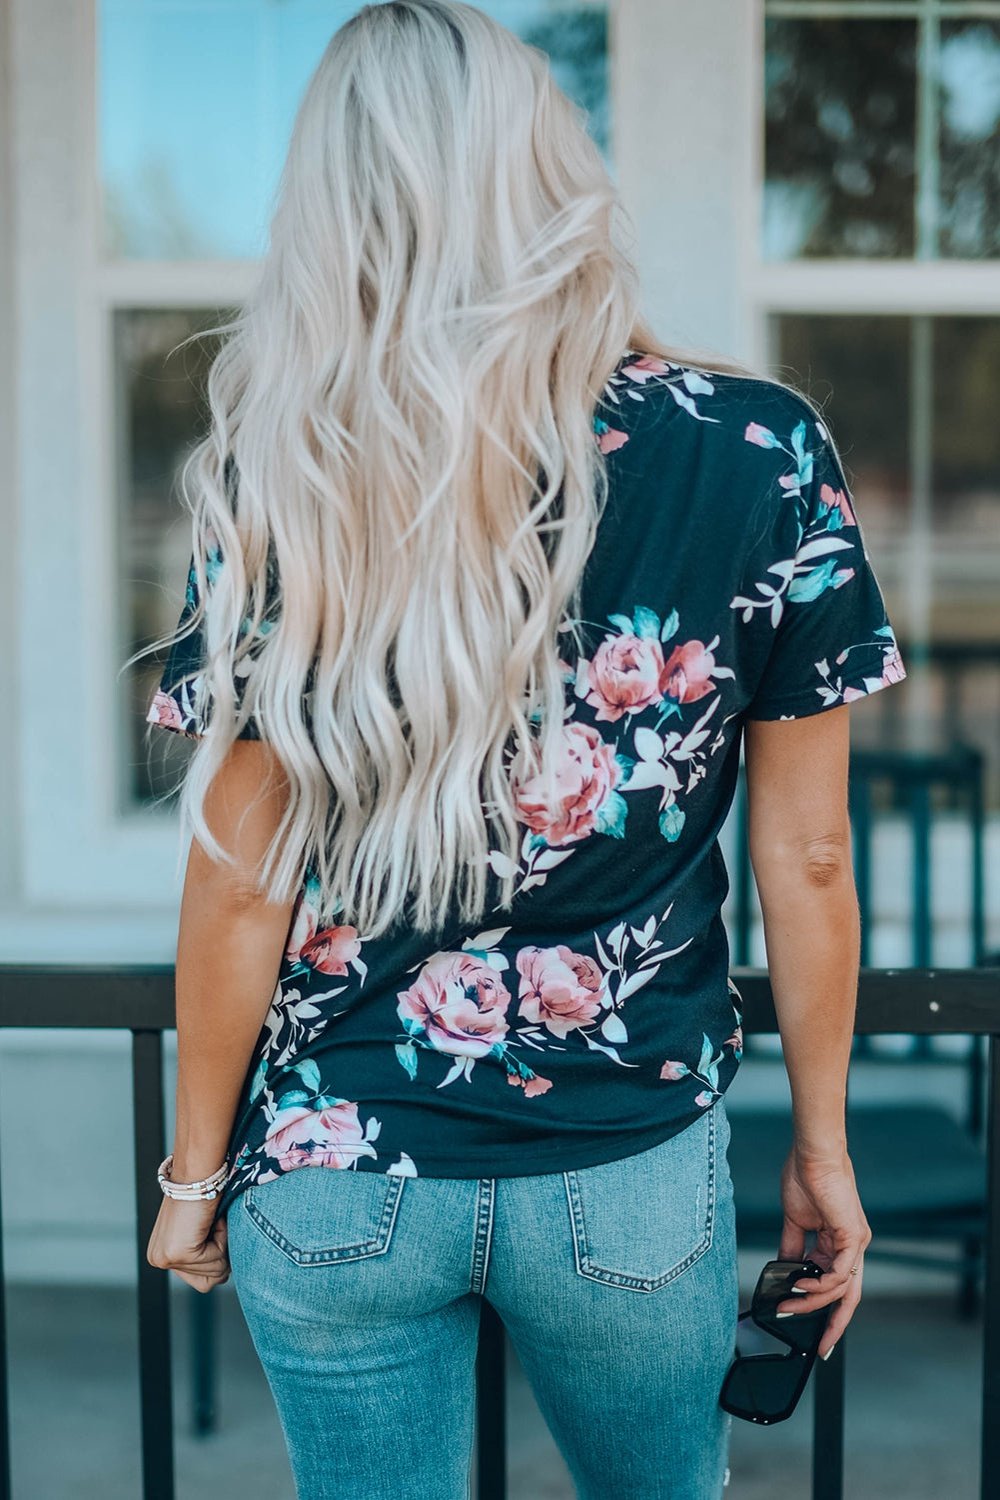 Floral Round Neck Short Sleeve Tee - T-Shirts - FITGGINS